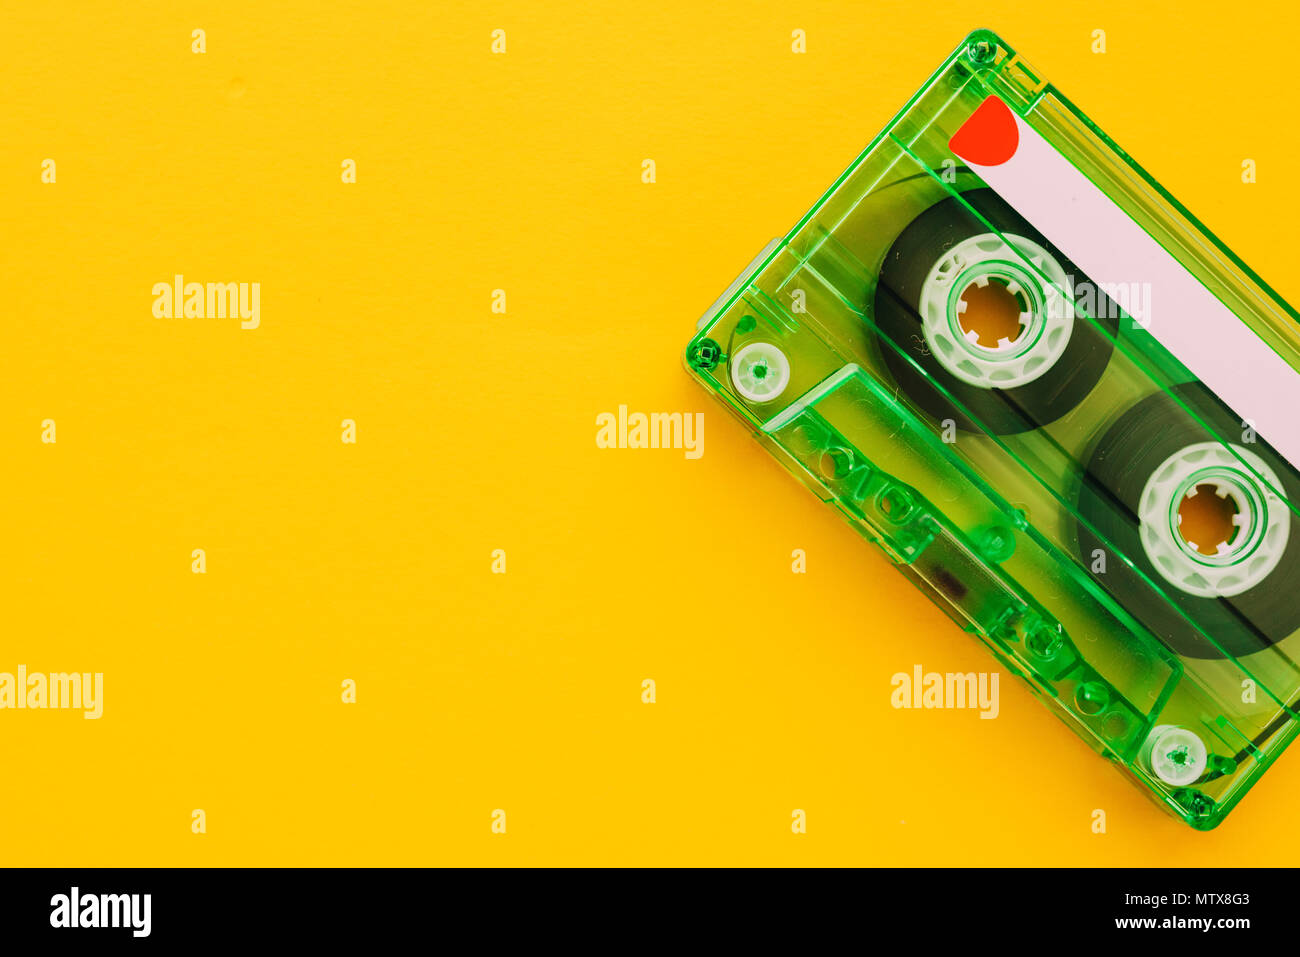 Audio cassette tape on yellow background with copy space, feeling nostalgia for retro vintage technology Stock Photo